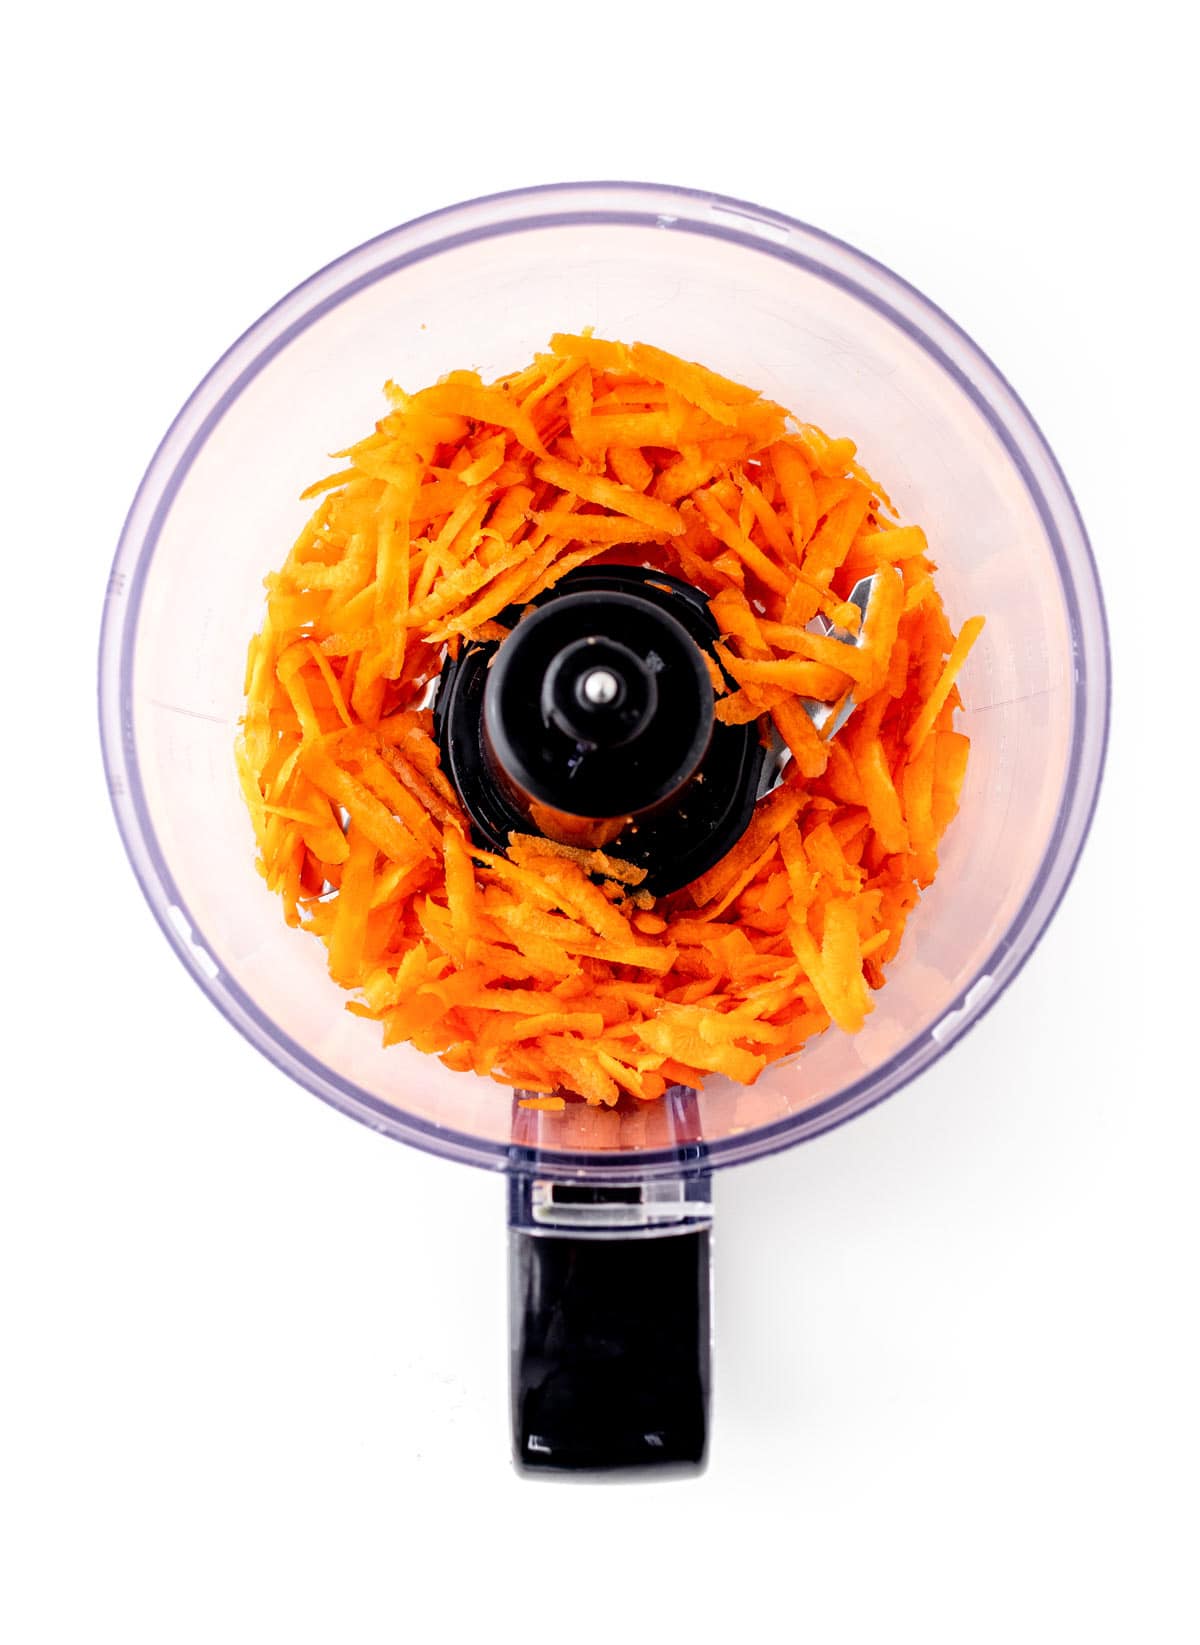 Shredded carrots in a food processor.